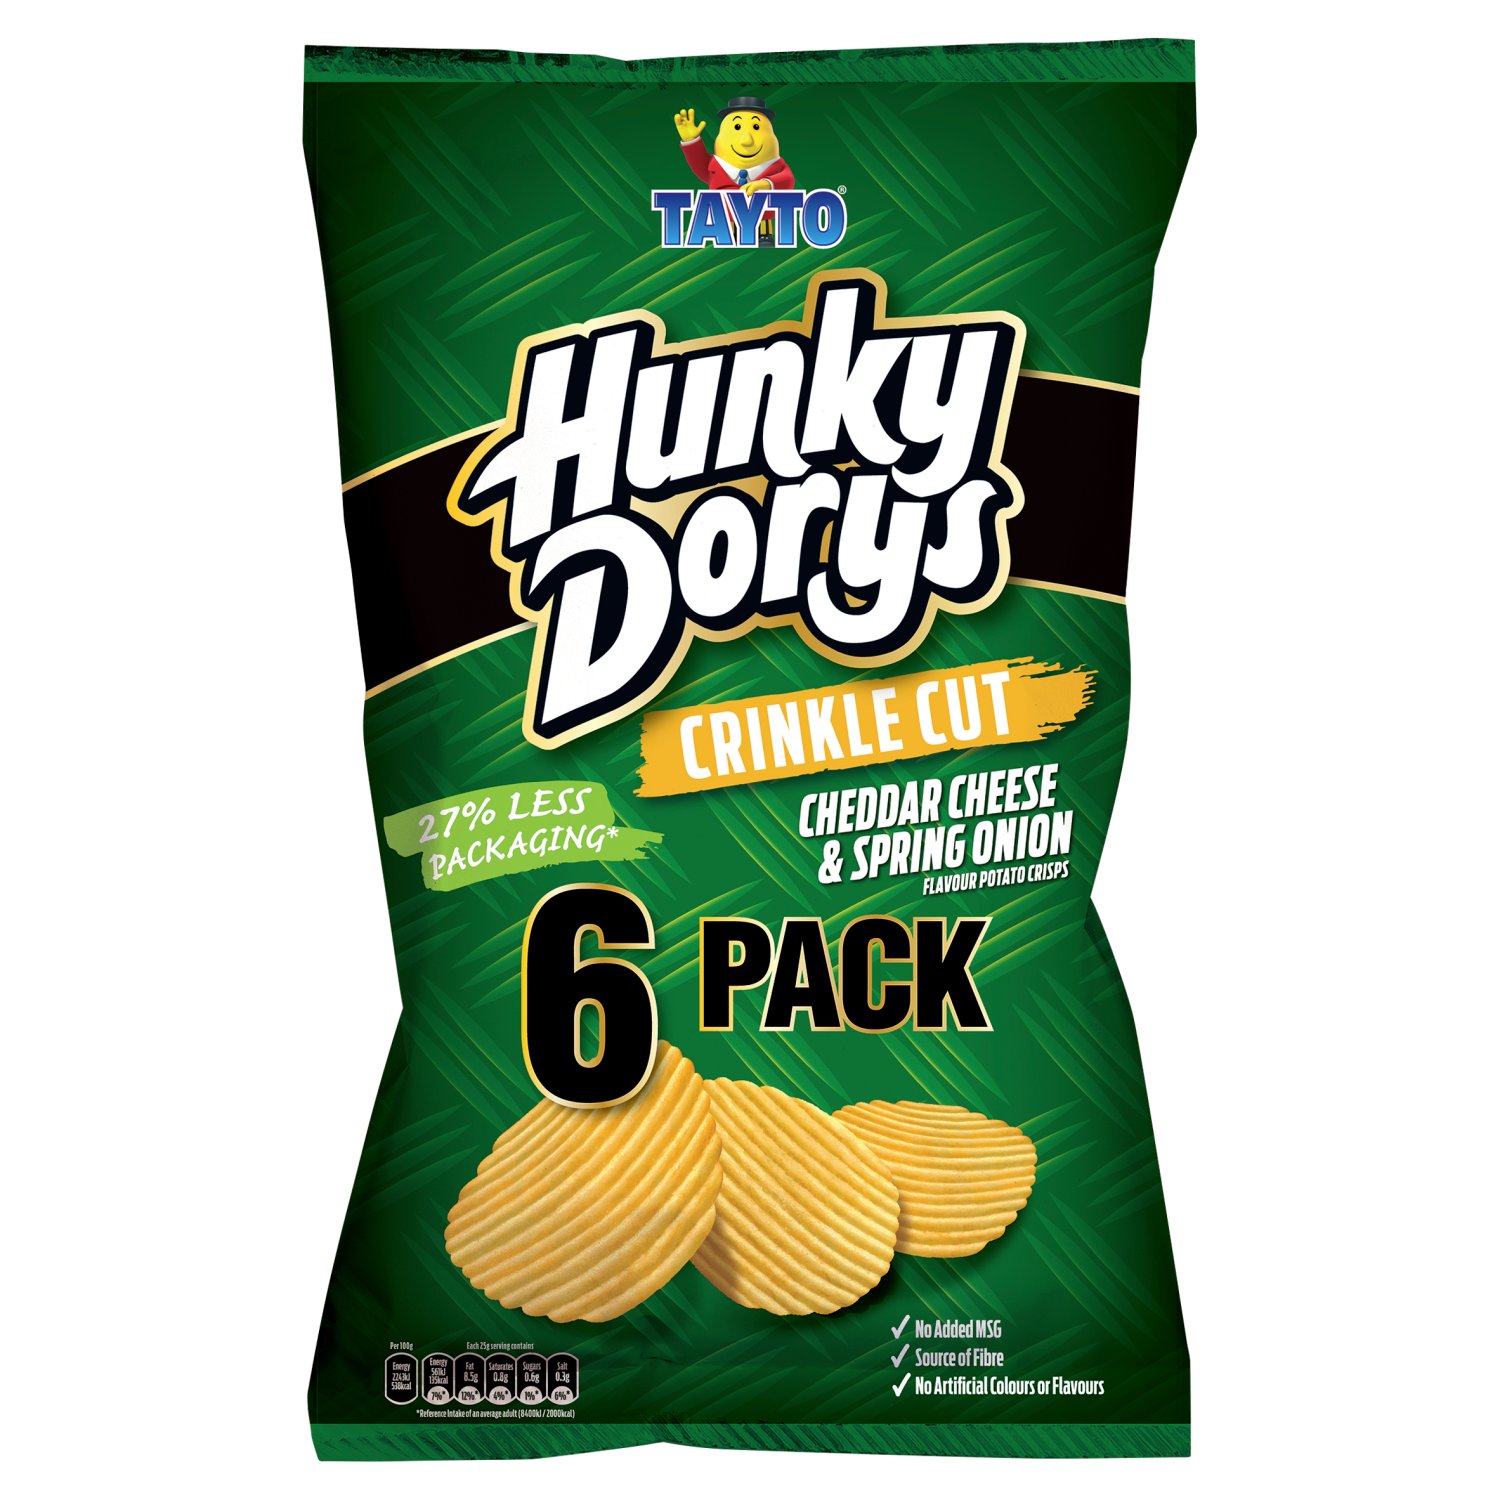 Tayto Hunky Dorys Crinkle Cut Cheddar Cheese & Spring Onion Crisps 6 Pack (25 g)